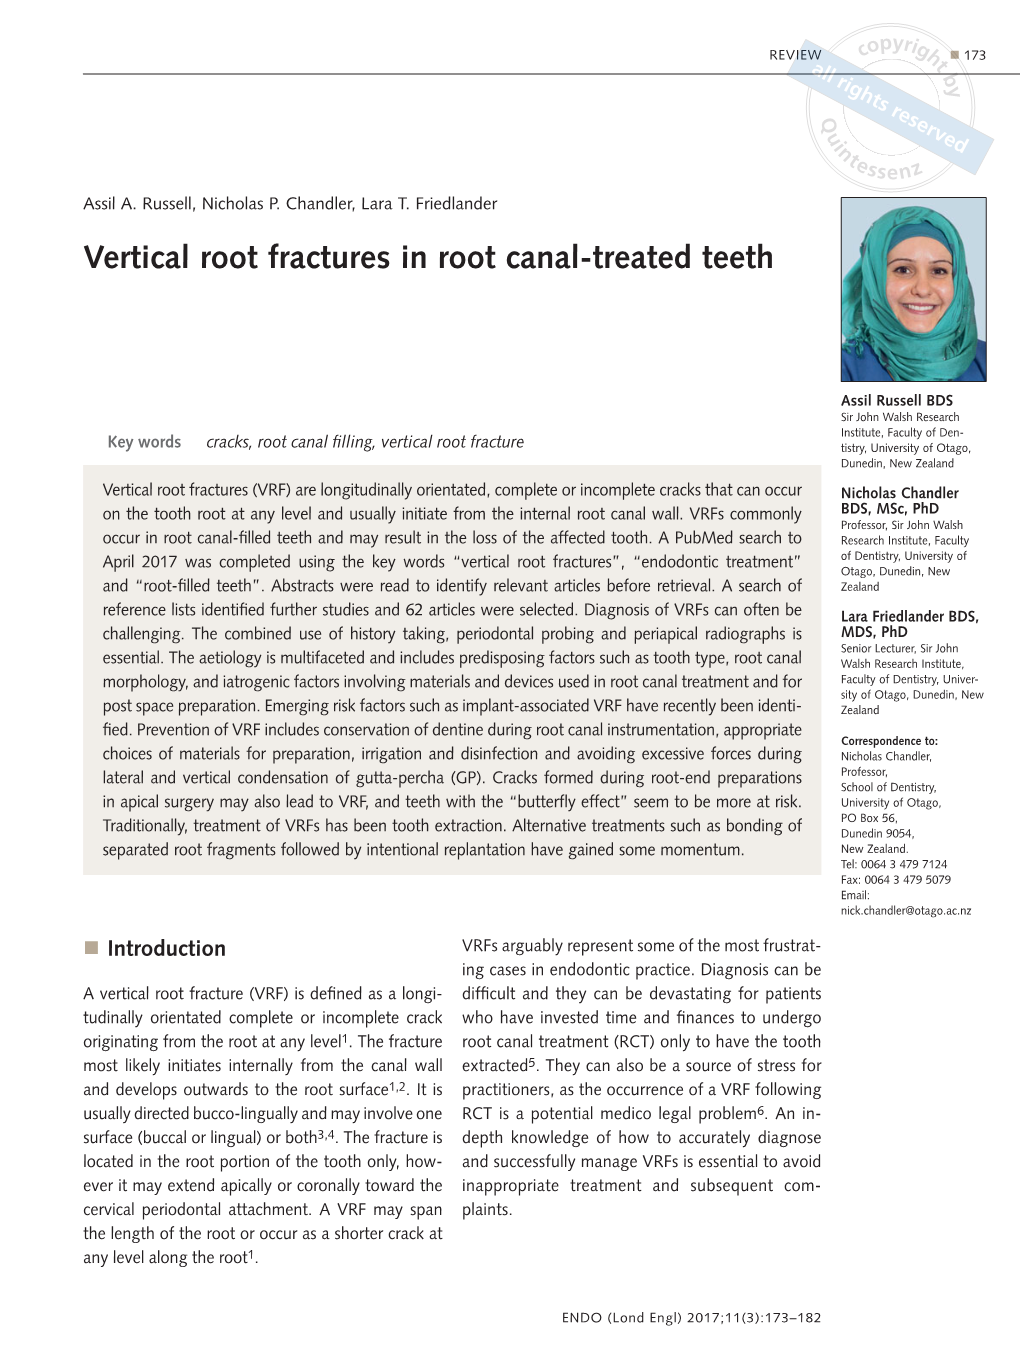 Vertical Root Fractures in Root Canal-Treated Teeth